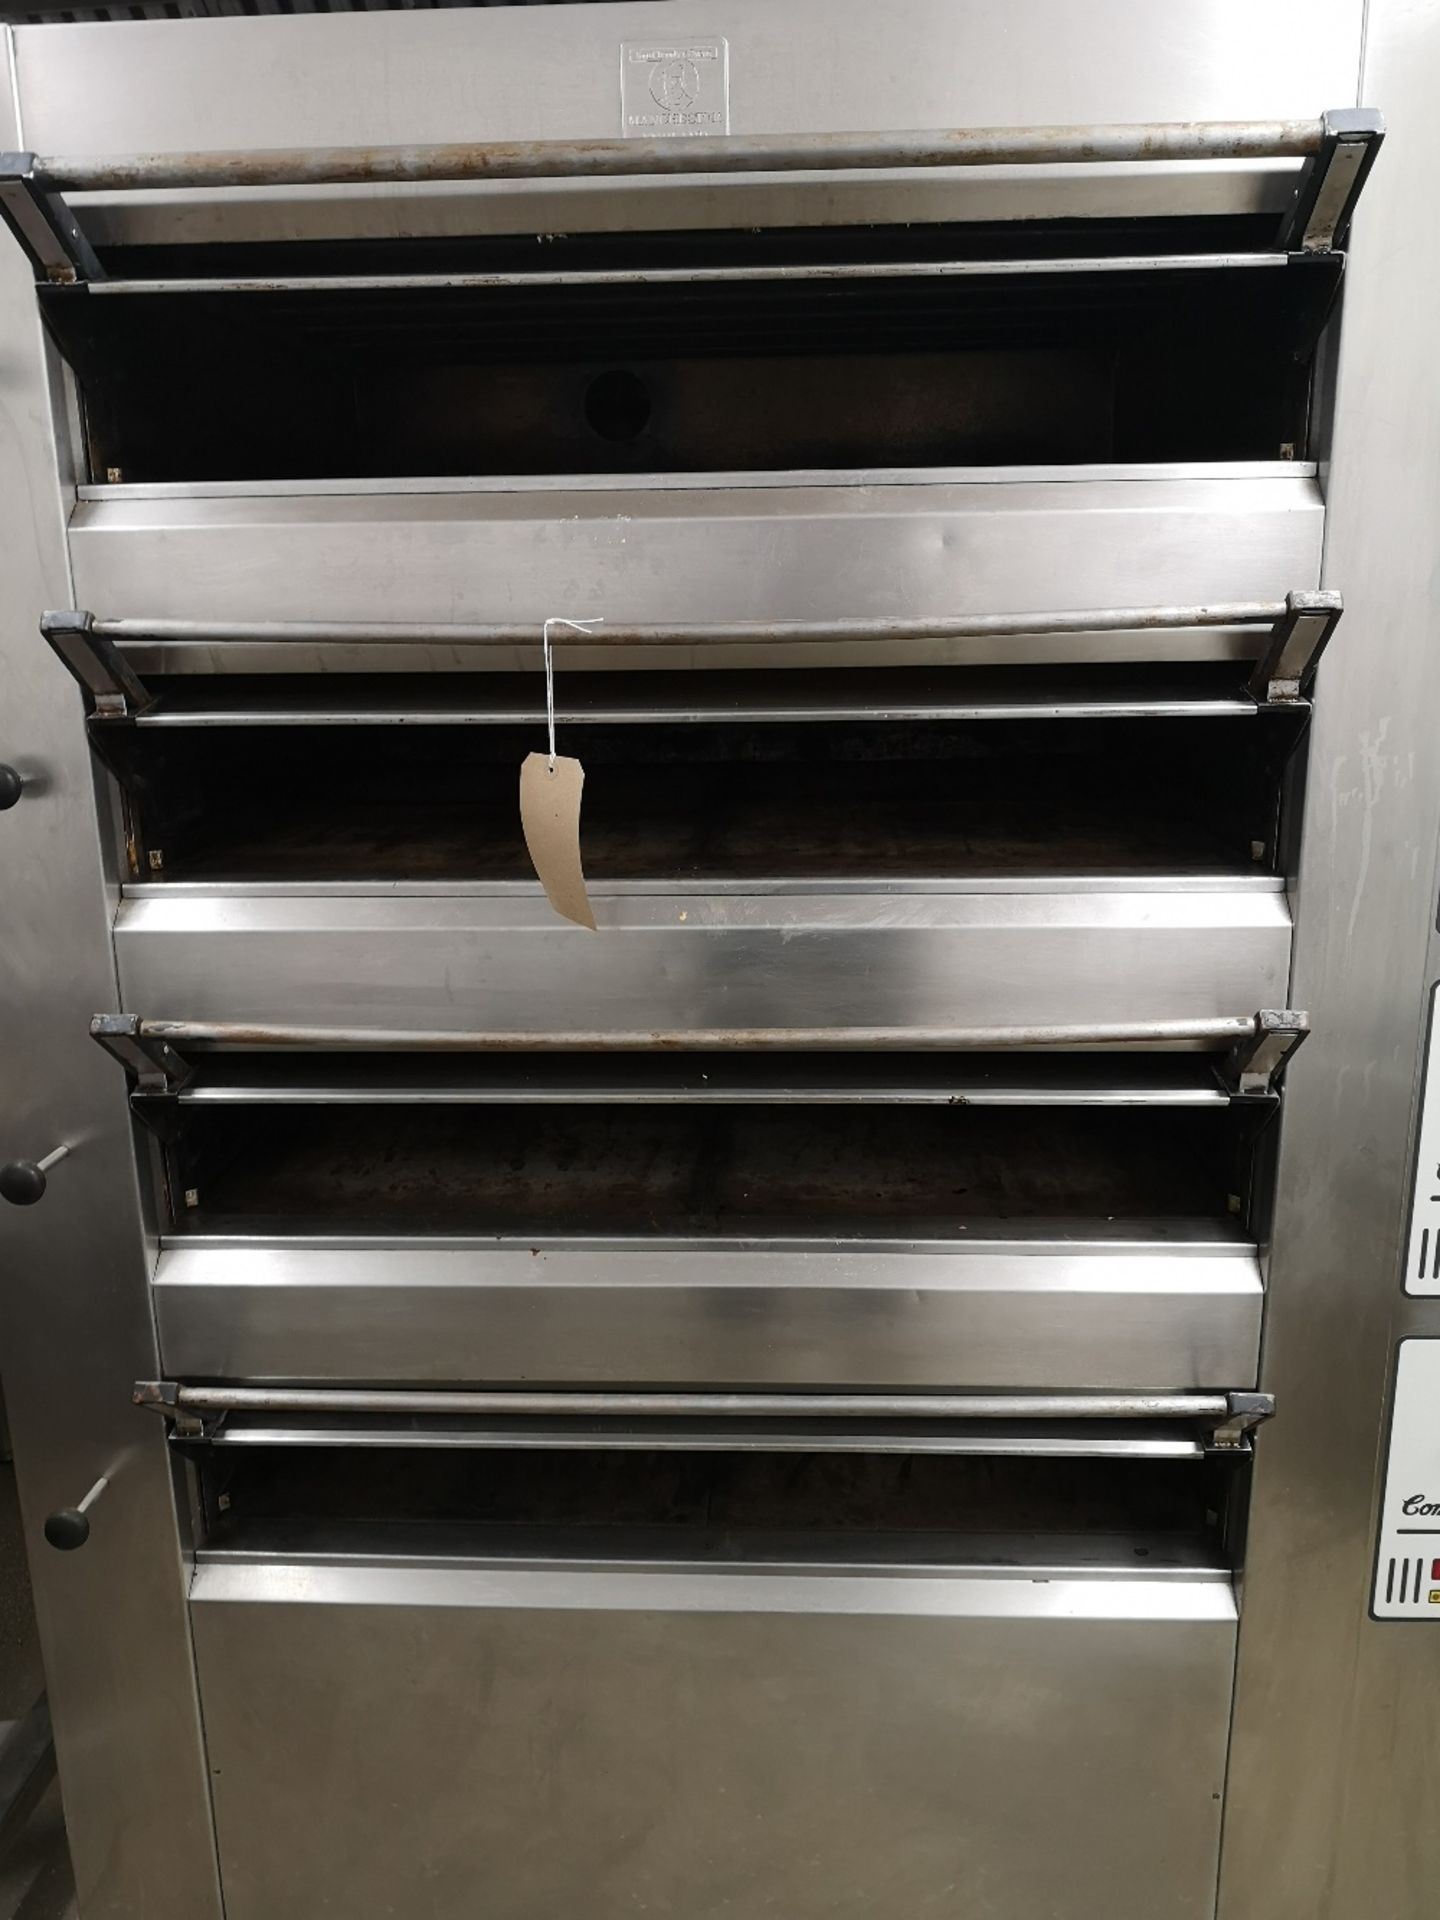 Tom Chandley Four Deck Twelve Tray 50 MK4 MT426 Compacta Oven - Image 5 of 5